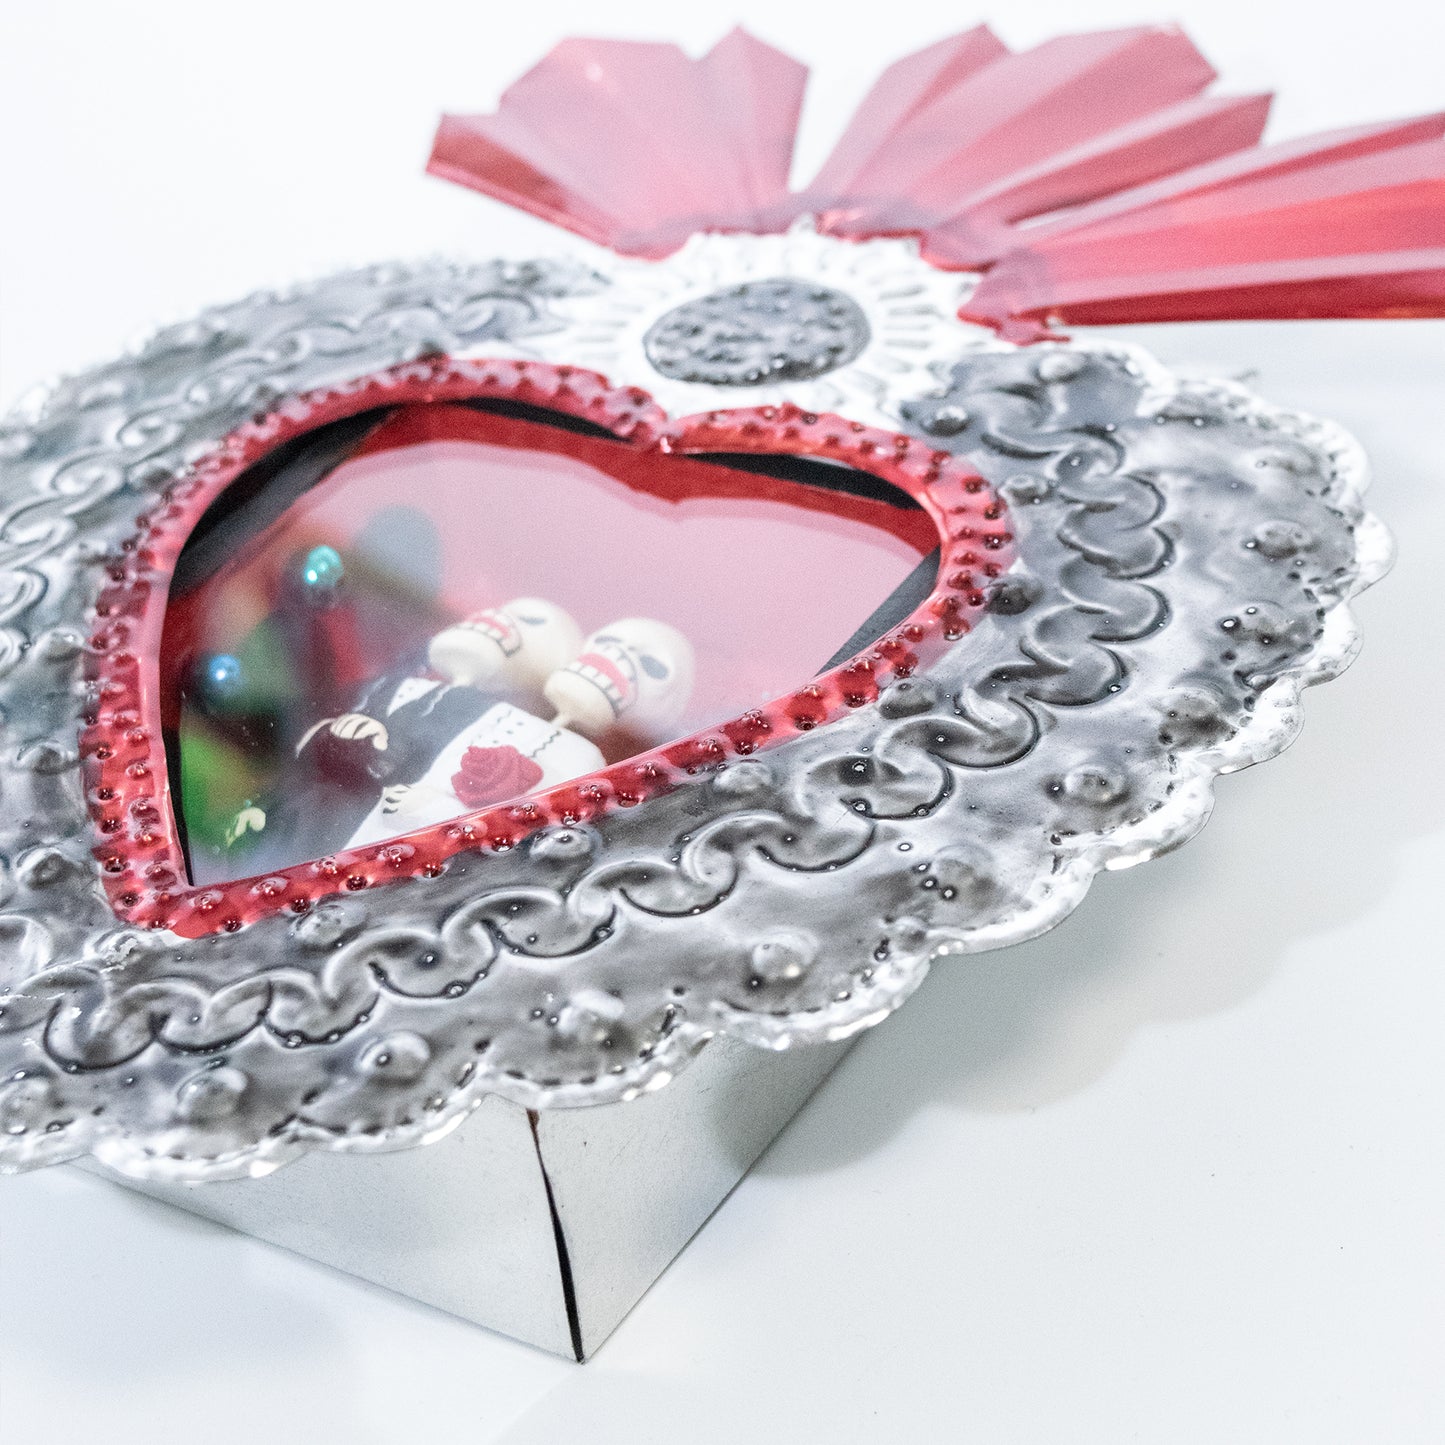 Corazon Skull Heart Wall Decoration - YOUAREMYPOISON